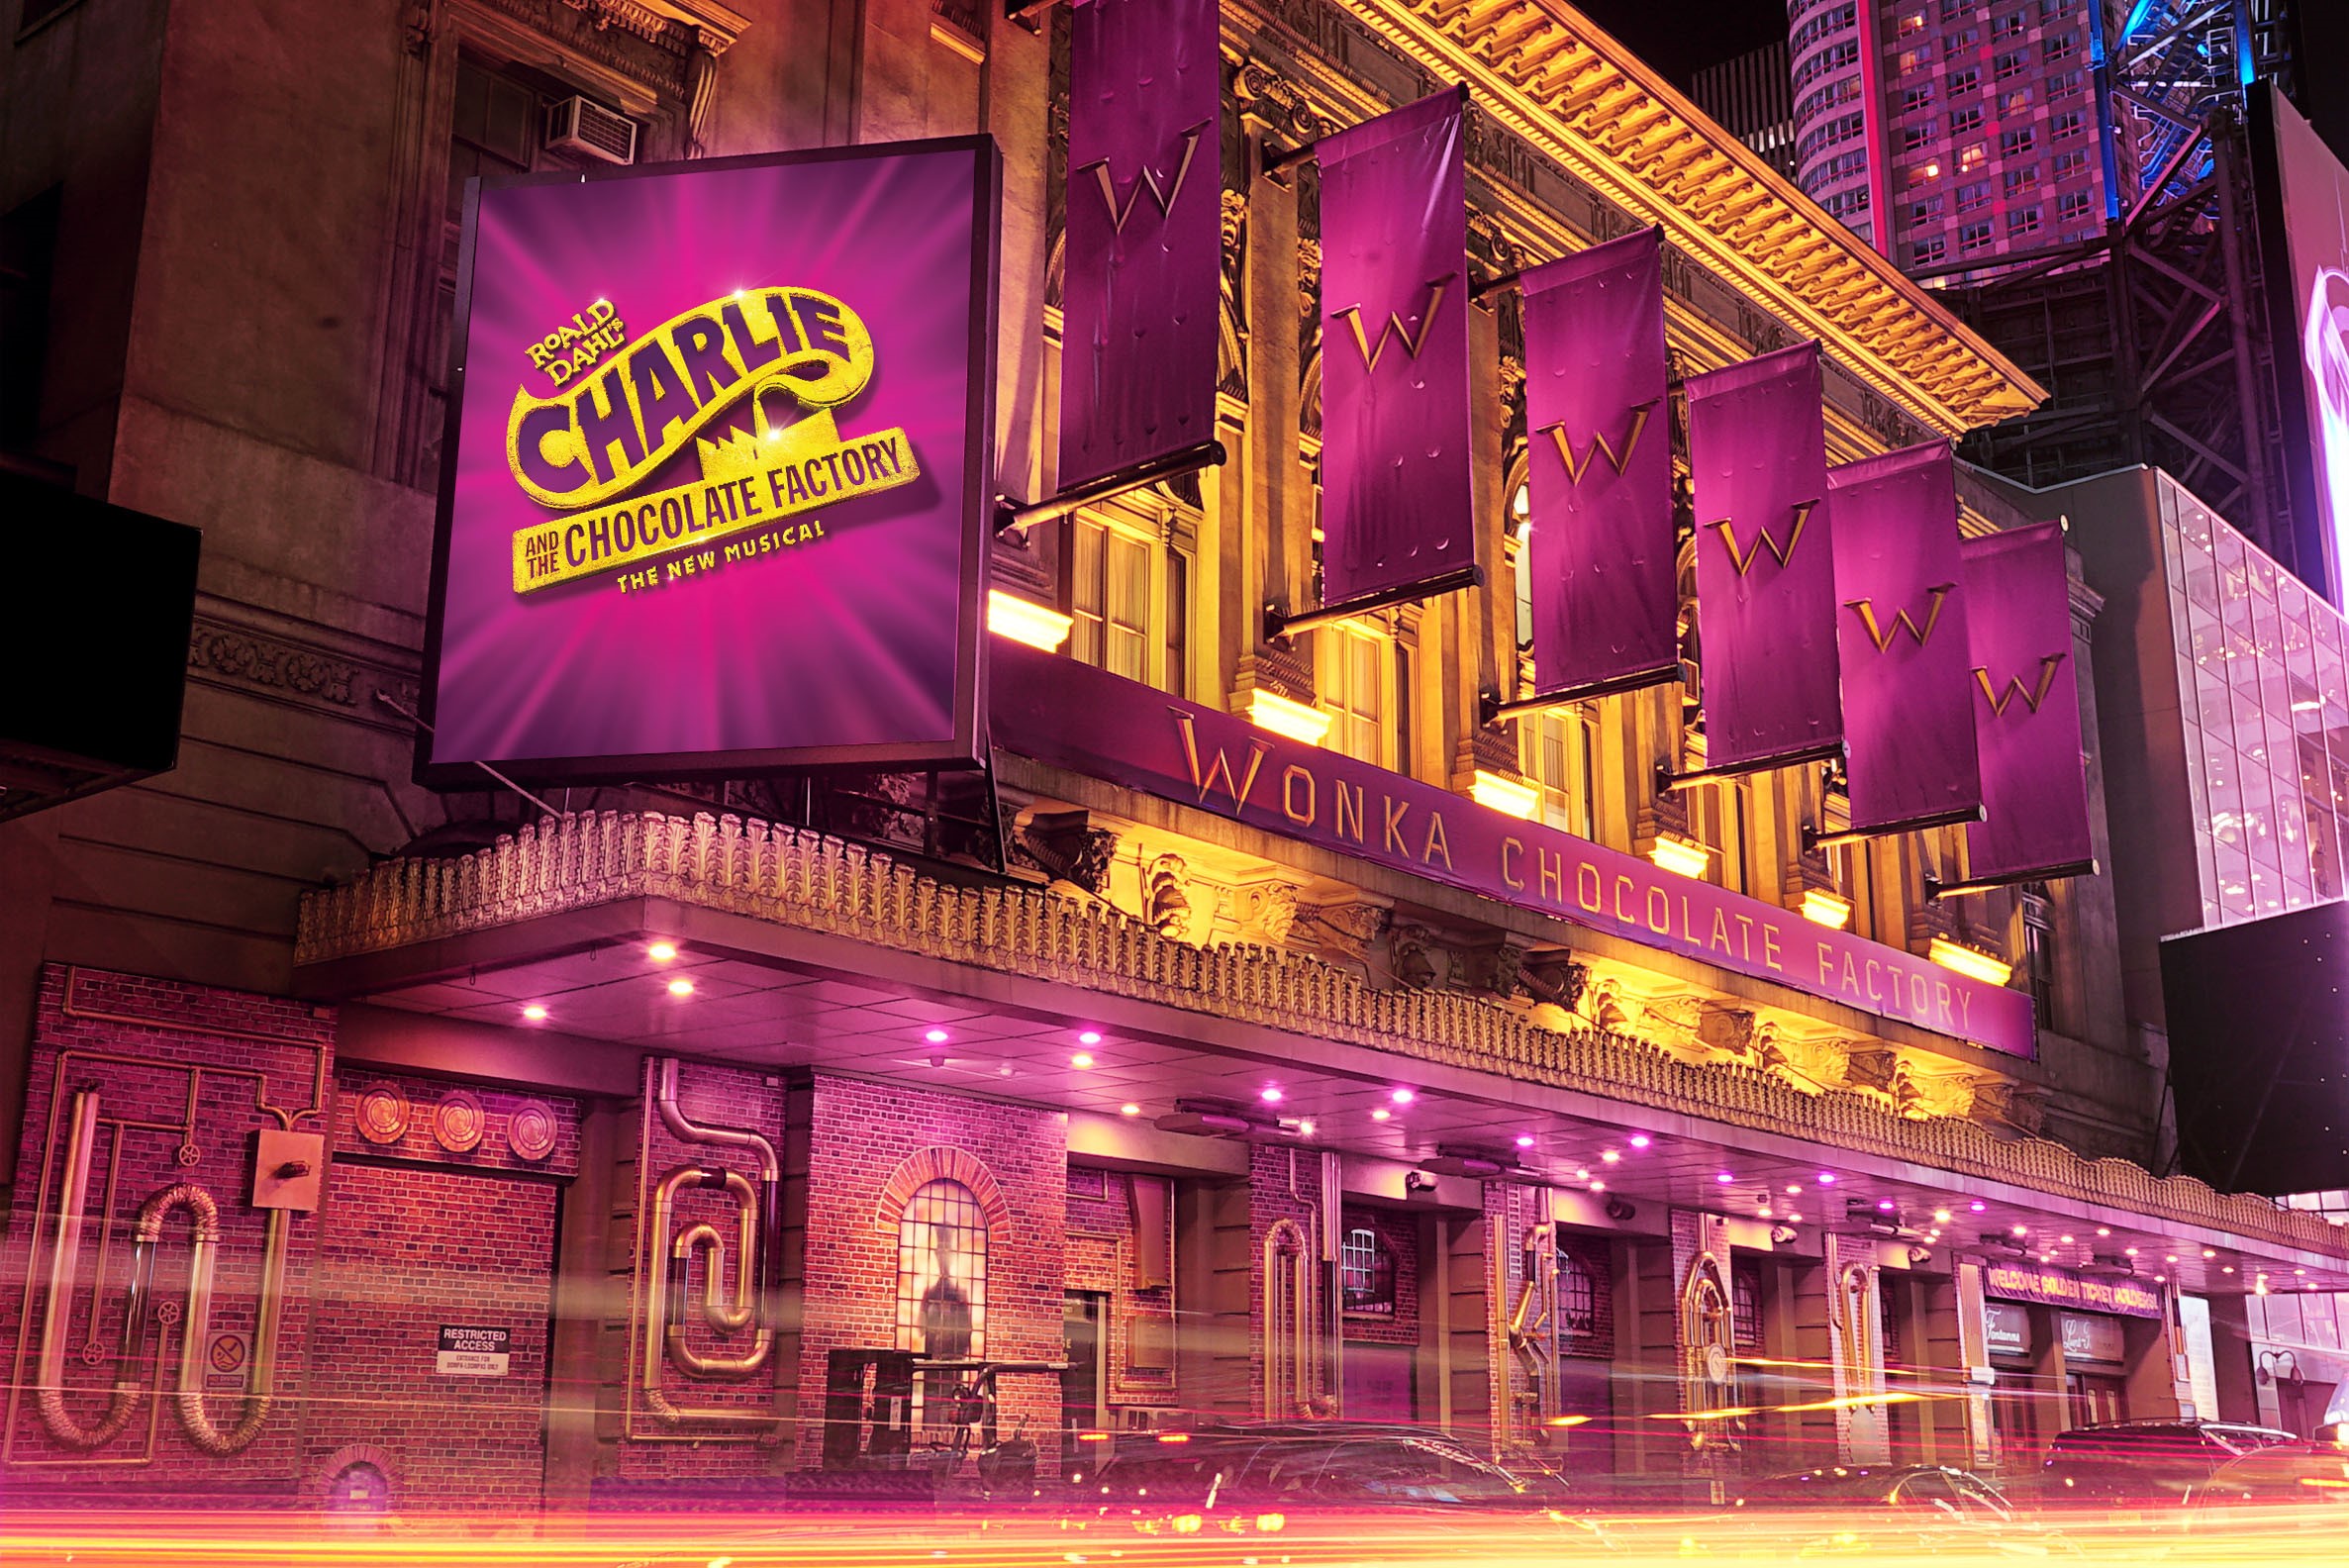 CHARLIE AND THE CHOCOLATE FACTORY: AKA transformed the Lunt-Fontanne Theatre